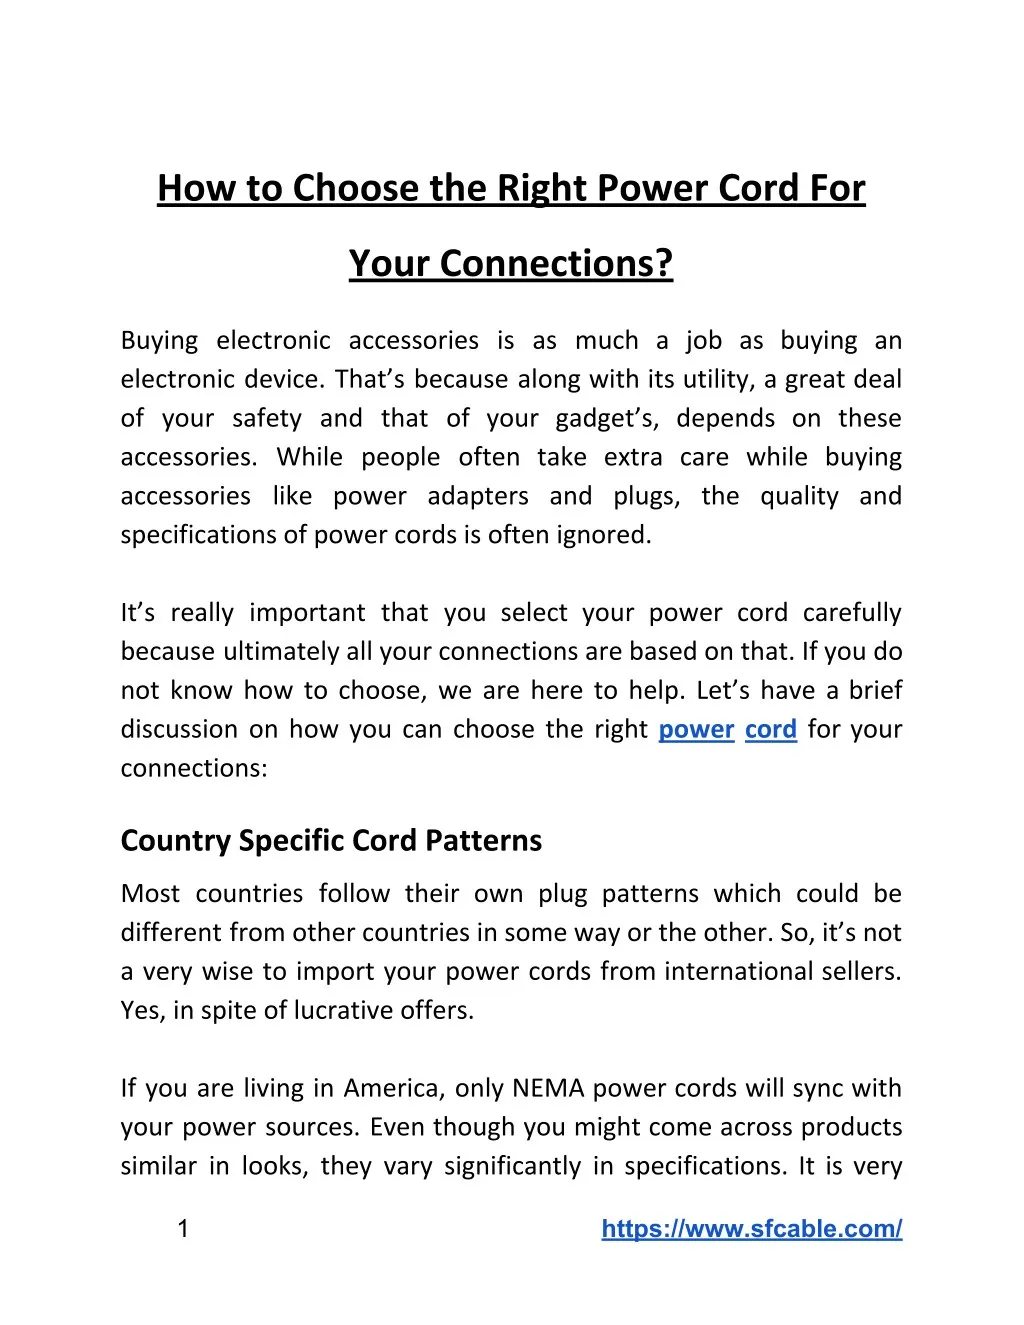 how to choose the right power cord for